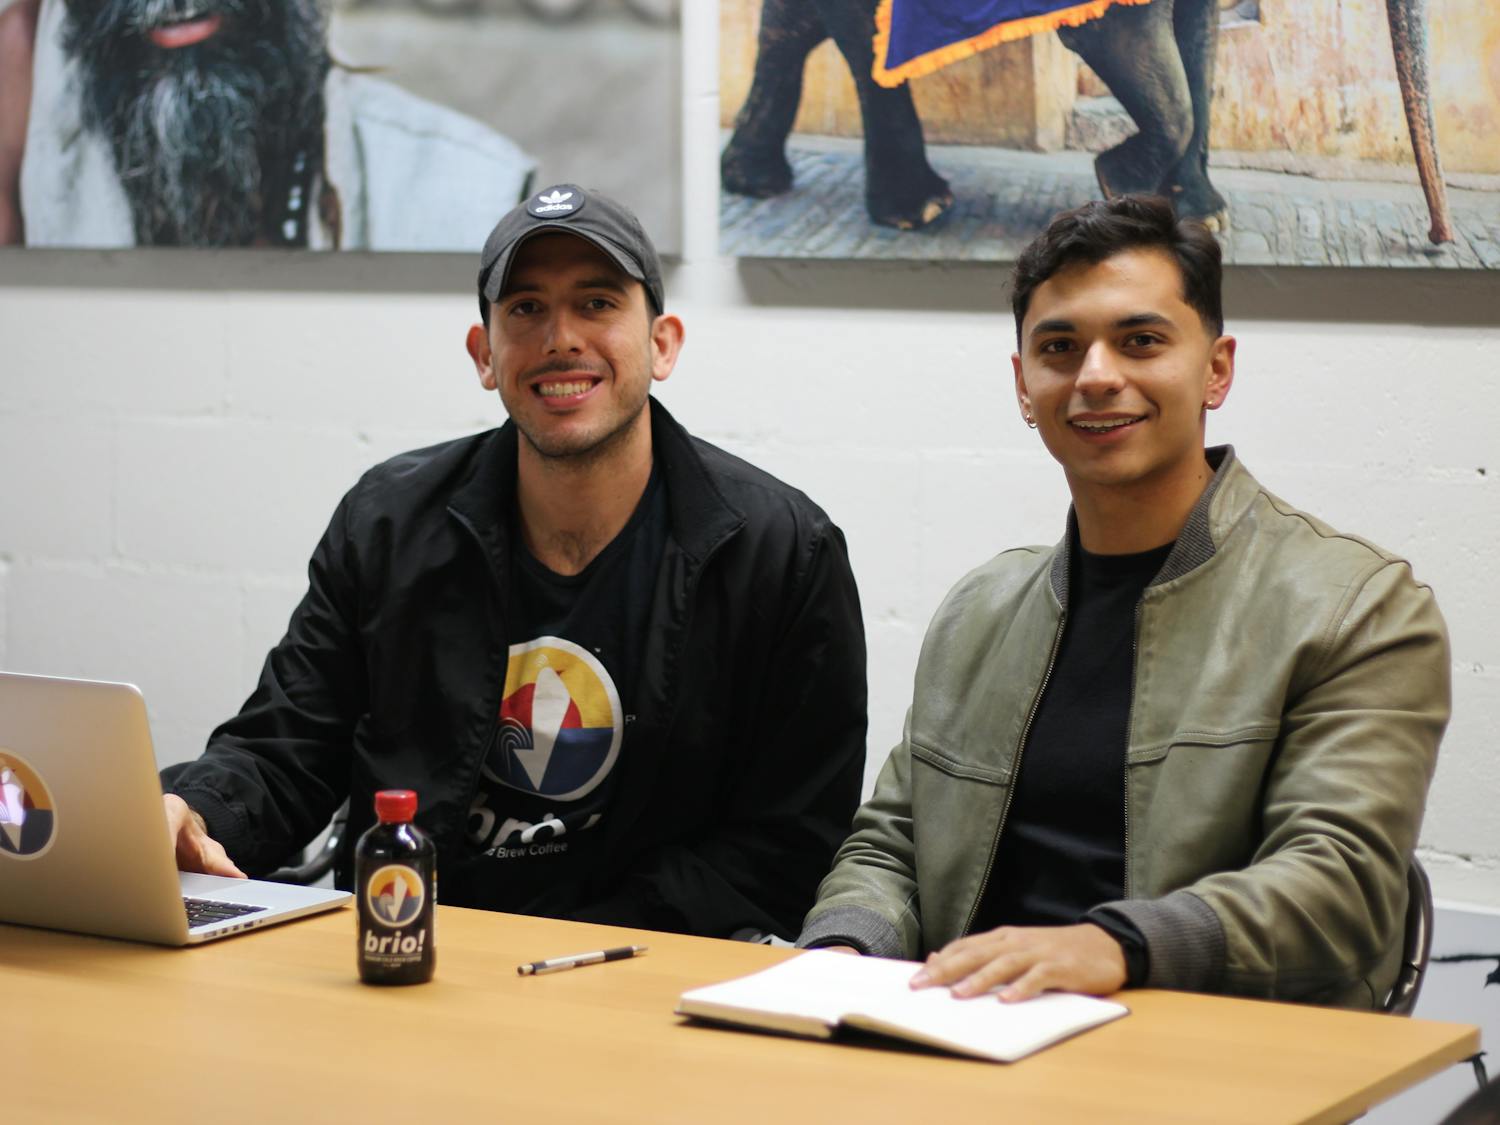 Jose Nieves, 28, who graduated from the Culinary Institute of America in New York, and Miguel Cardona, 27, who graduated from the UF School of Architecture.  